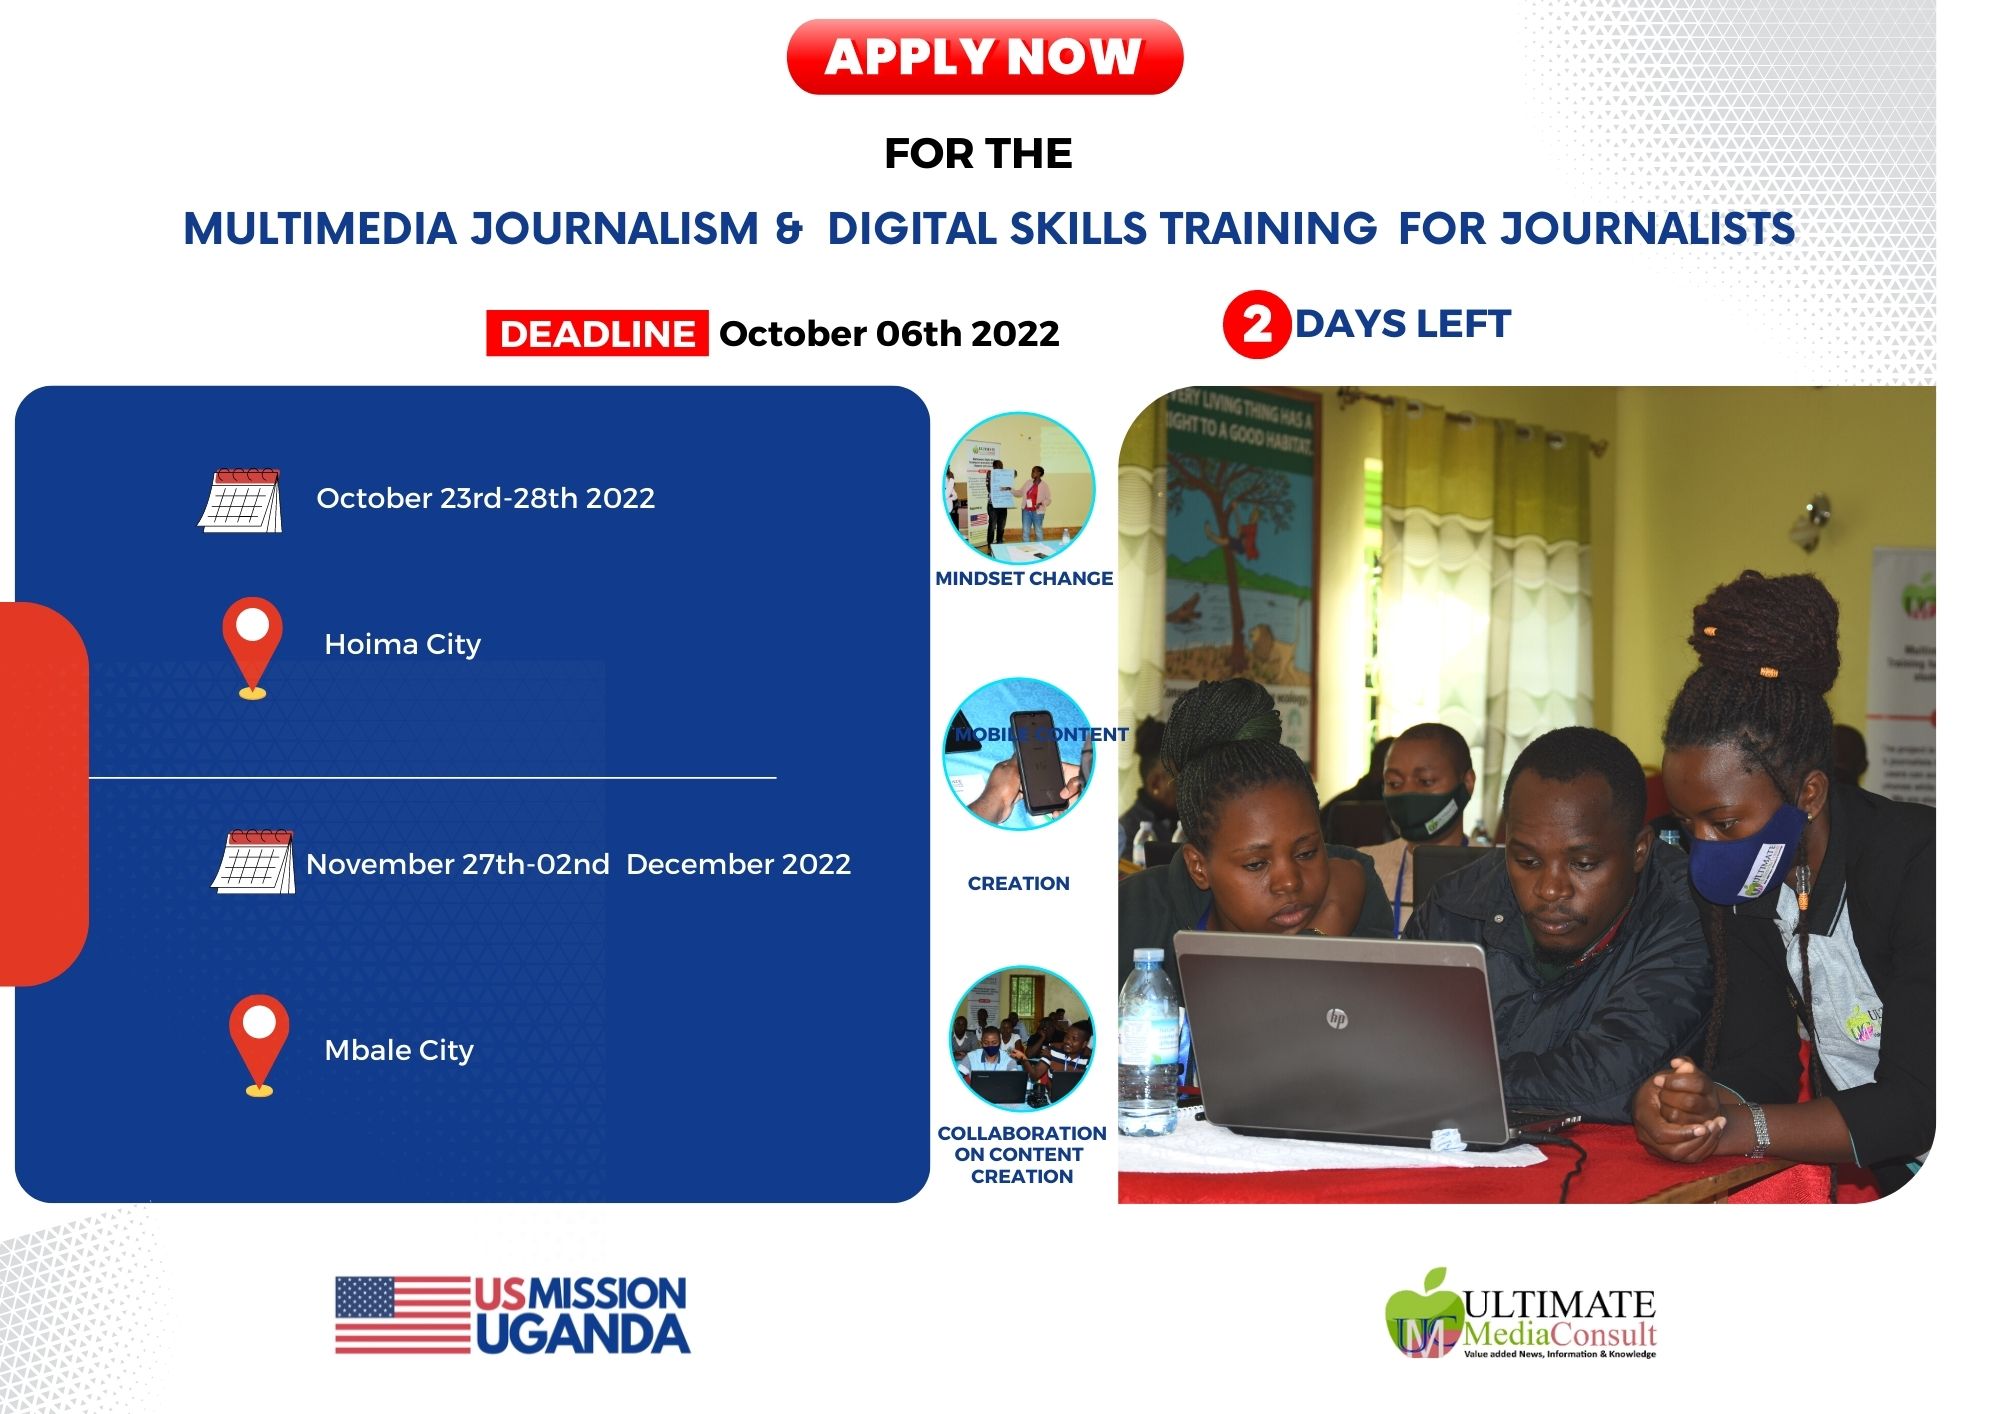 Applications Invited For Journalists To Be Trained In Multimedia Journalism and Digital Skills. 2